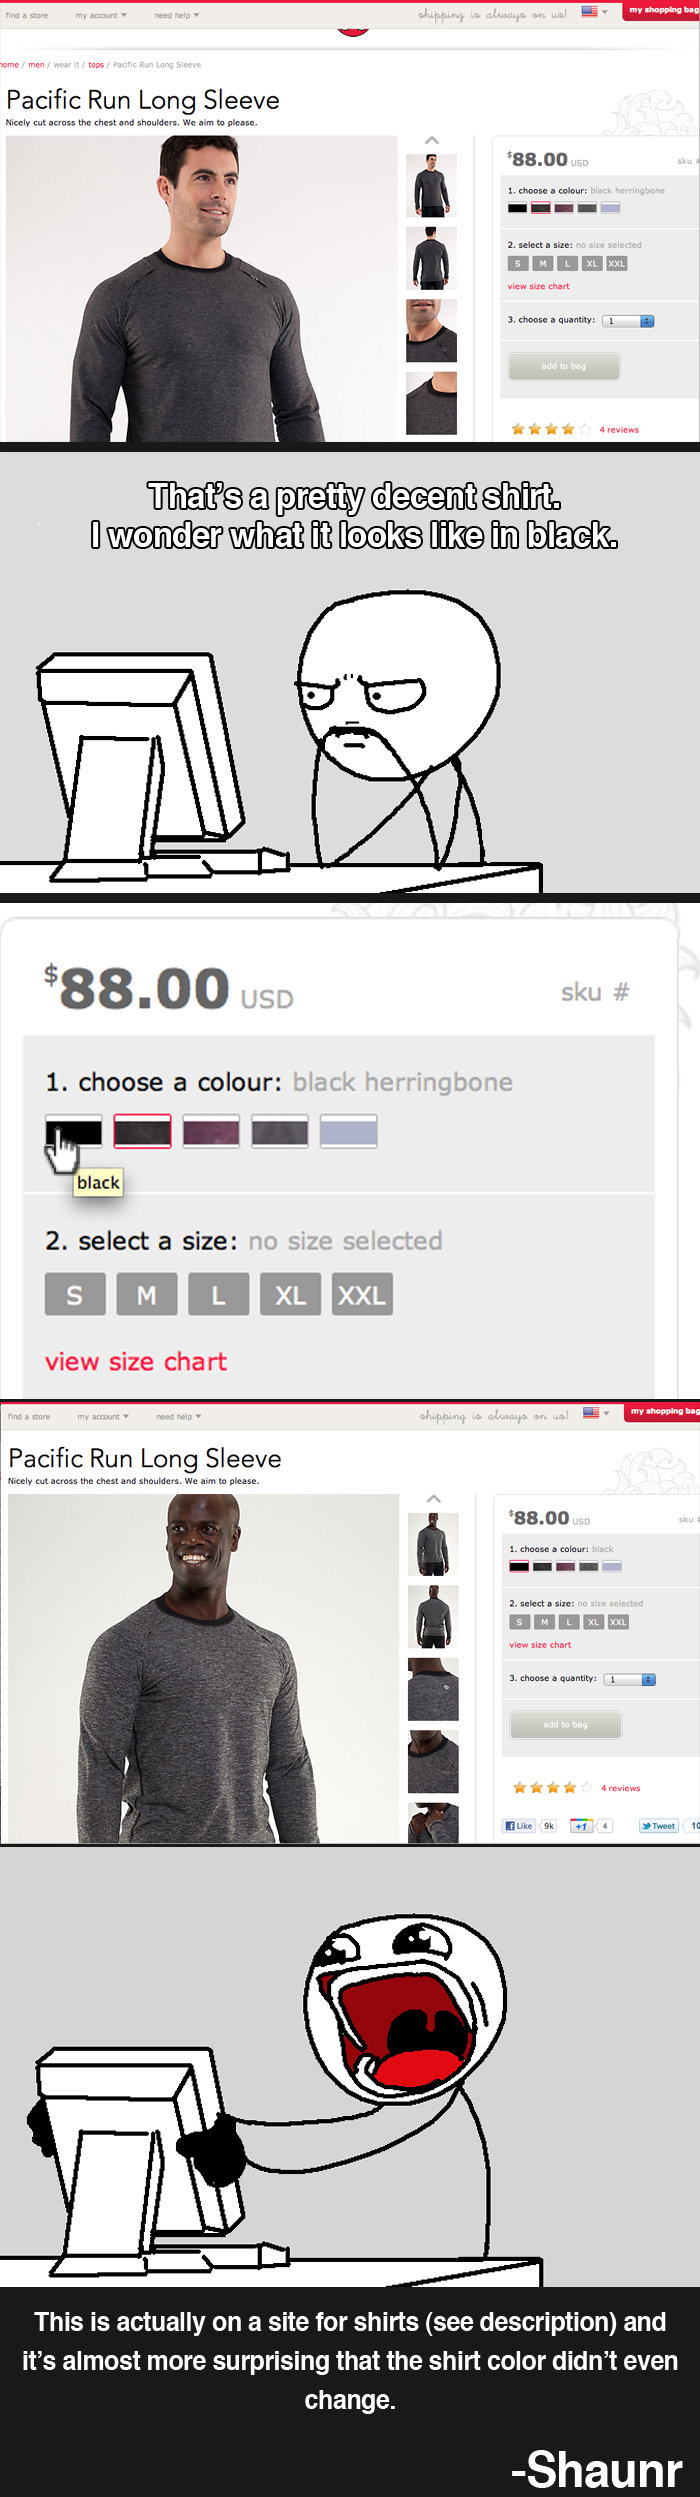 And the shirt is freakin expensive. http://tinyurl.com/cu2vzjg
or use the long link 
http://shop.lululemon.com/products/clothes-accessories/men-tops/Pacific-Run-Long-Sleeve-28632?cc9547skuId3431023catIdmen-tops